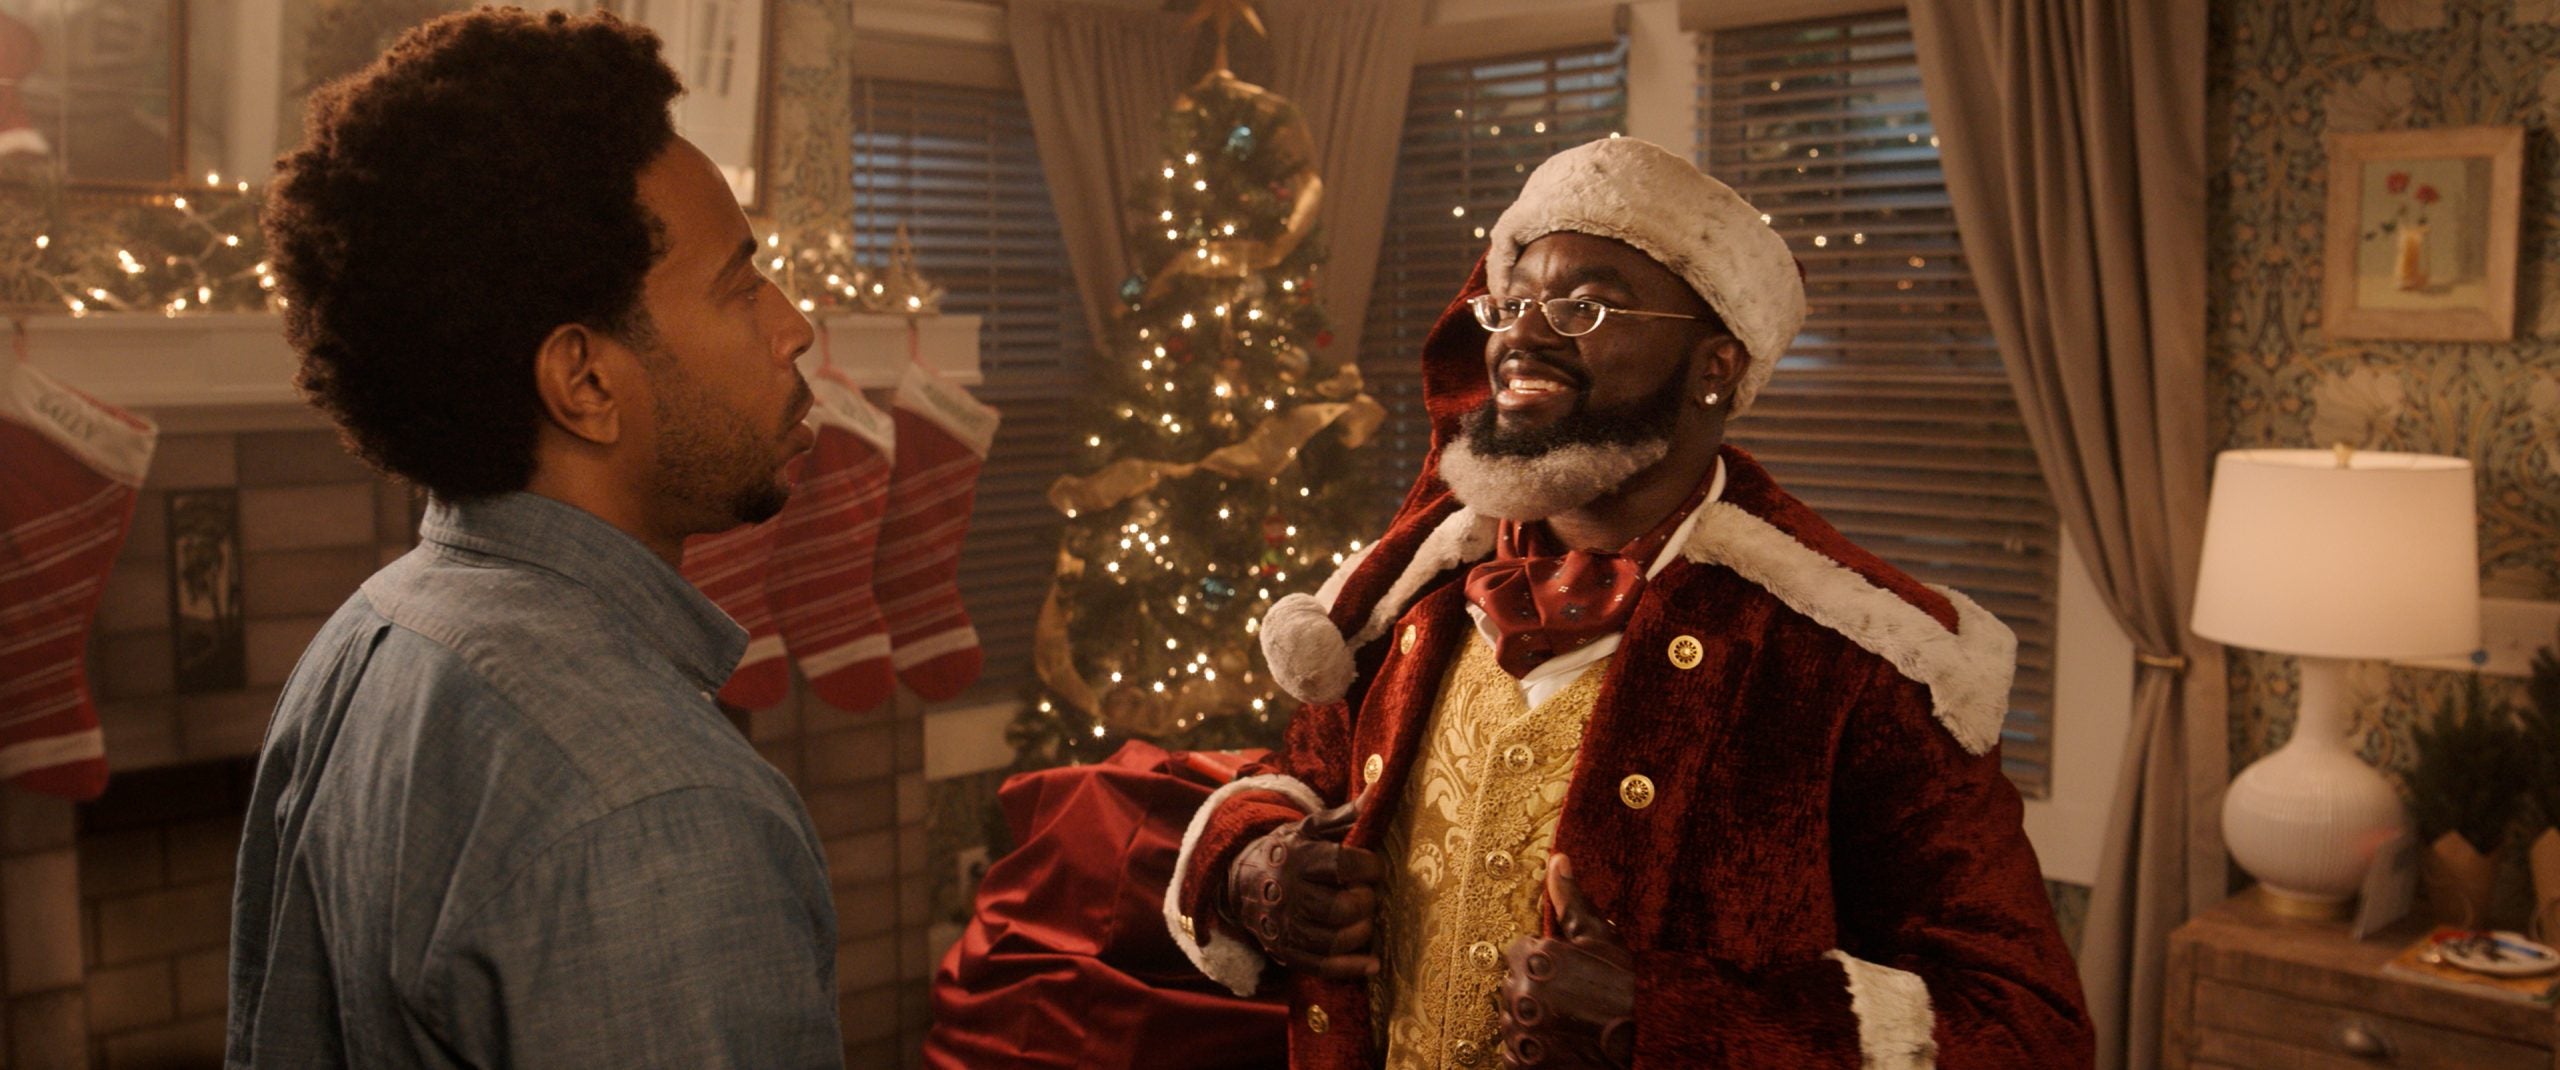 14 Movies To Watch This Holiday Season